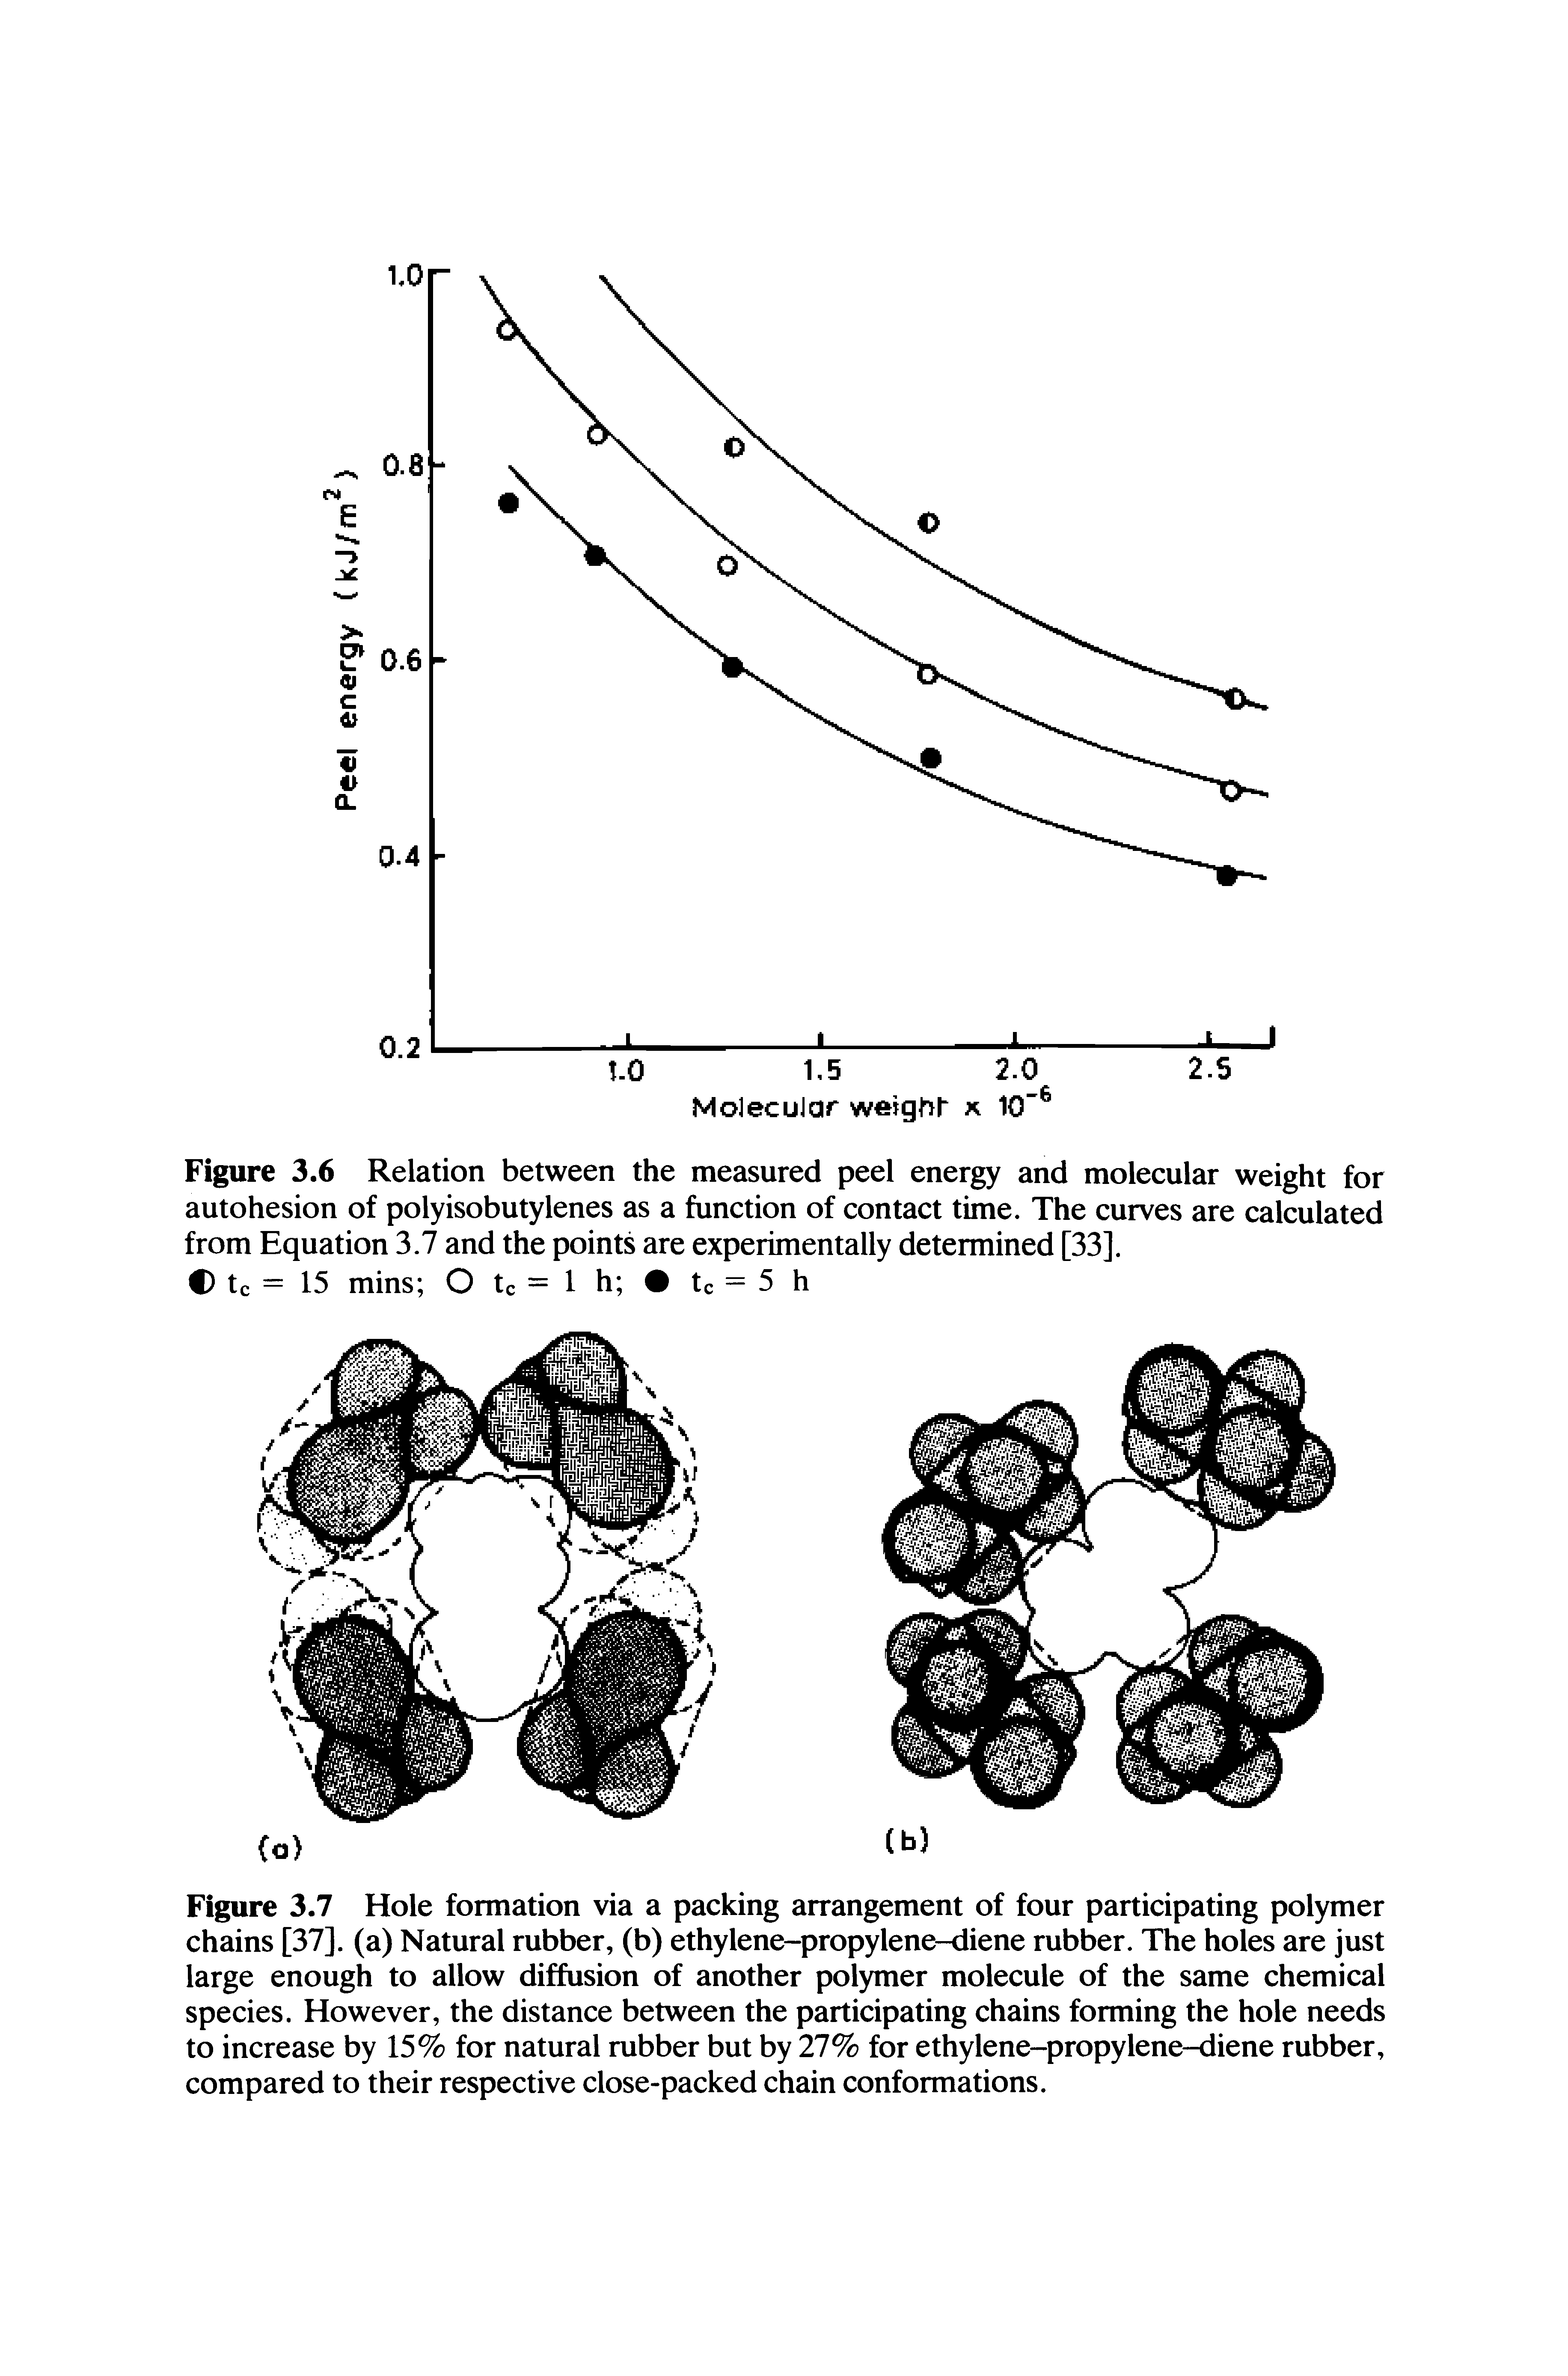 Figure 3.7 Hole formation via a packing arrangement of four participating polymer chains [37]. (a) Natural rubber, (b) ethylene-propylene-diene rubber. The holes are just large enough to allow diffusion of another polymer molecule of the same chemical species. However, the distance between the participating chains forming the hole needs to increase by 15% for natural rubber but by 27% for ethylene-propylene-diene rubber, compared to their respective close-packed chain conformations.